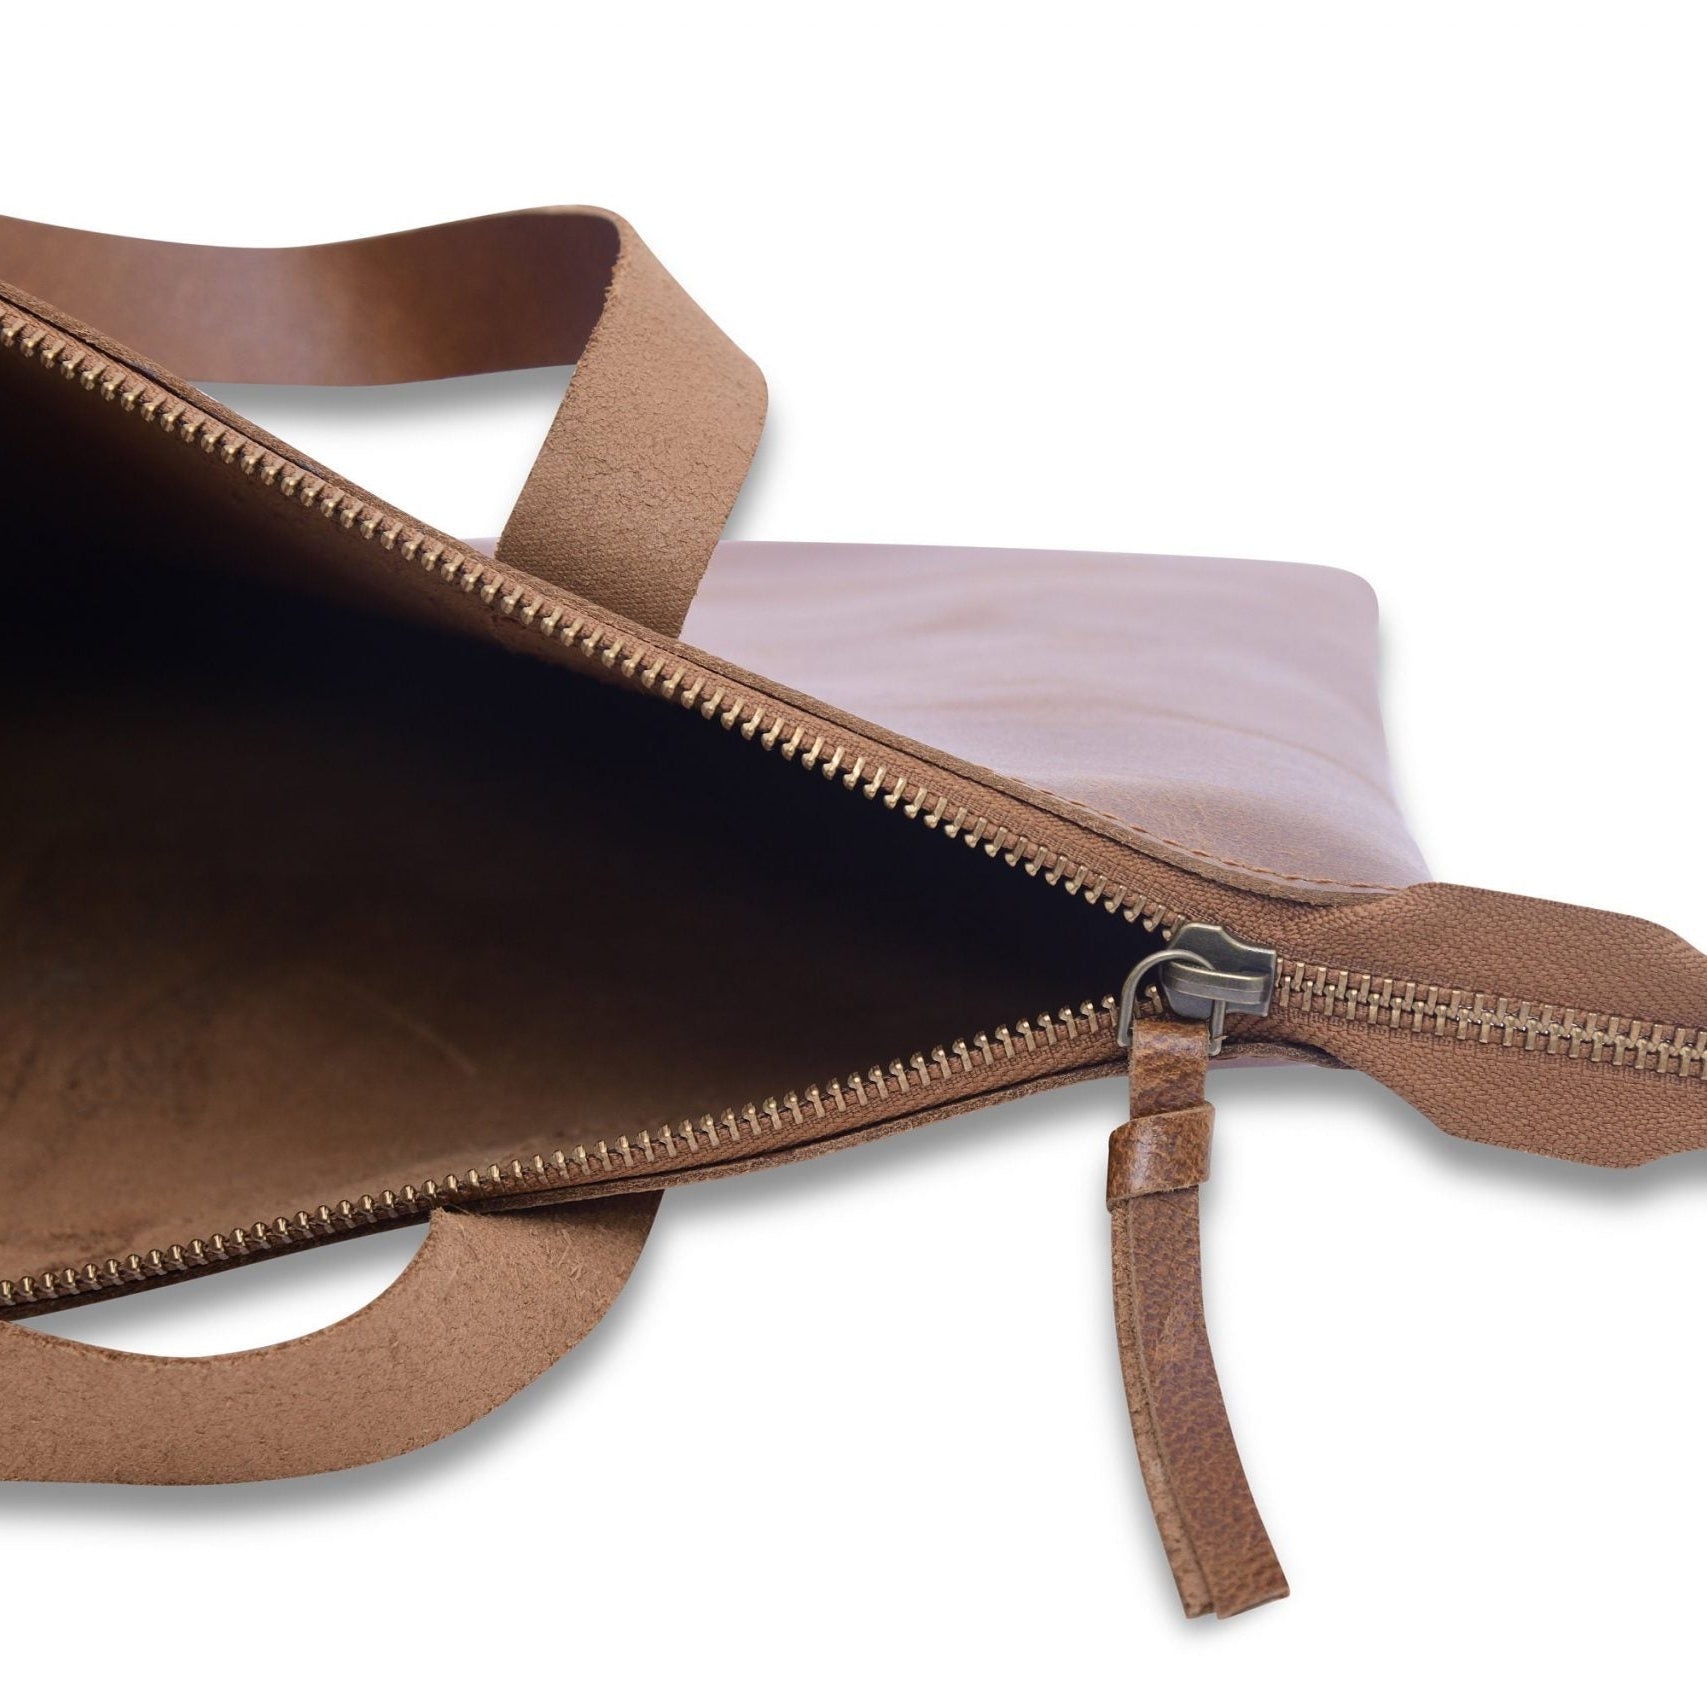 Timeless Travels: Genuine Leather Messenger Bag for All Occasions